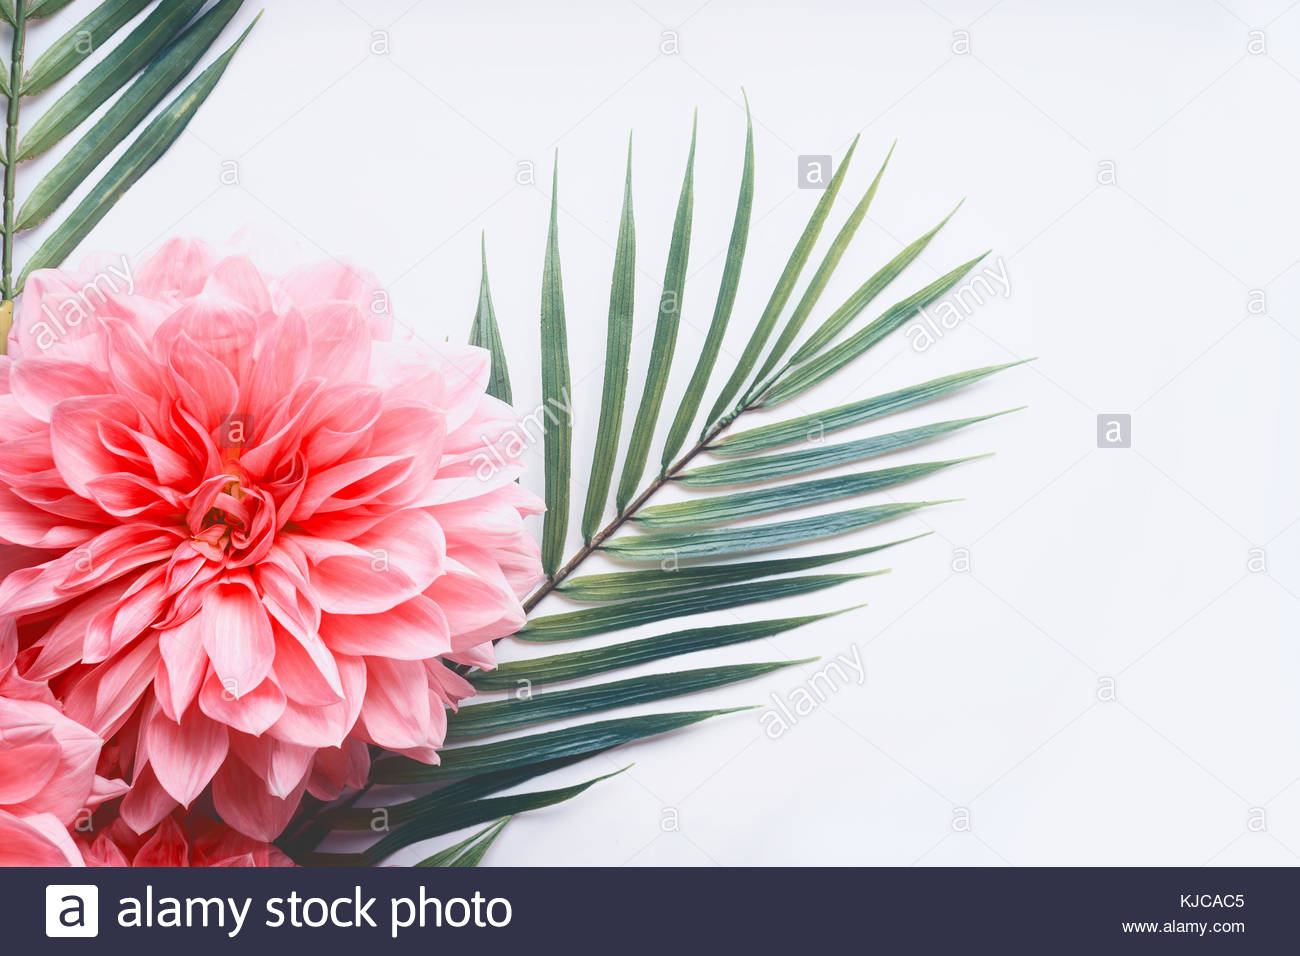 Pink Flowers And Tropical Leaves On White Desktop Background